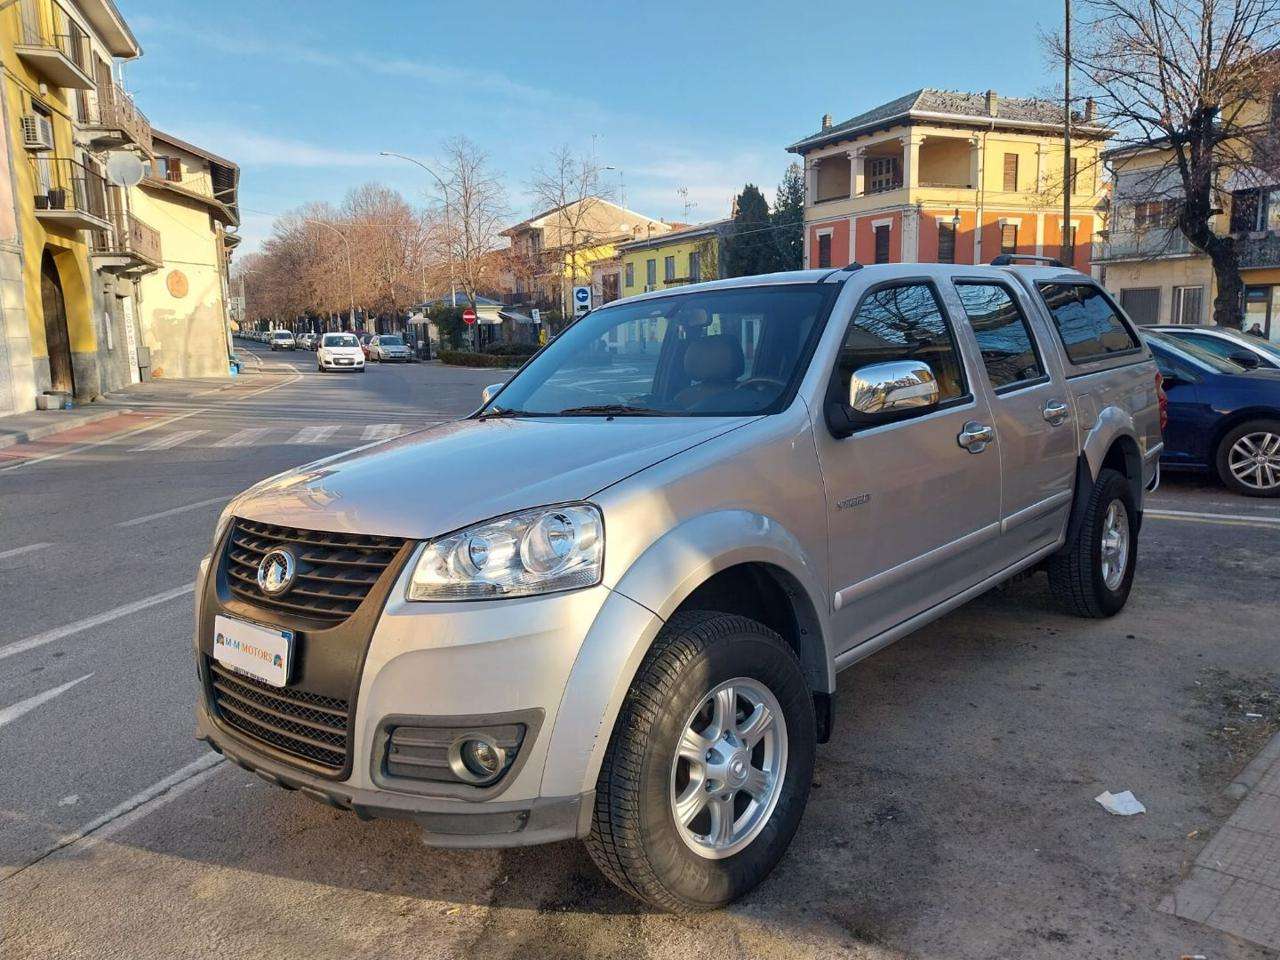 Great Wall Steed Transporter in Grey used in Galliate - Novara - NO for € 14,900.-